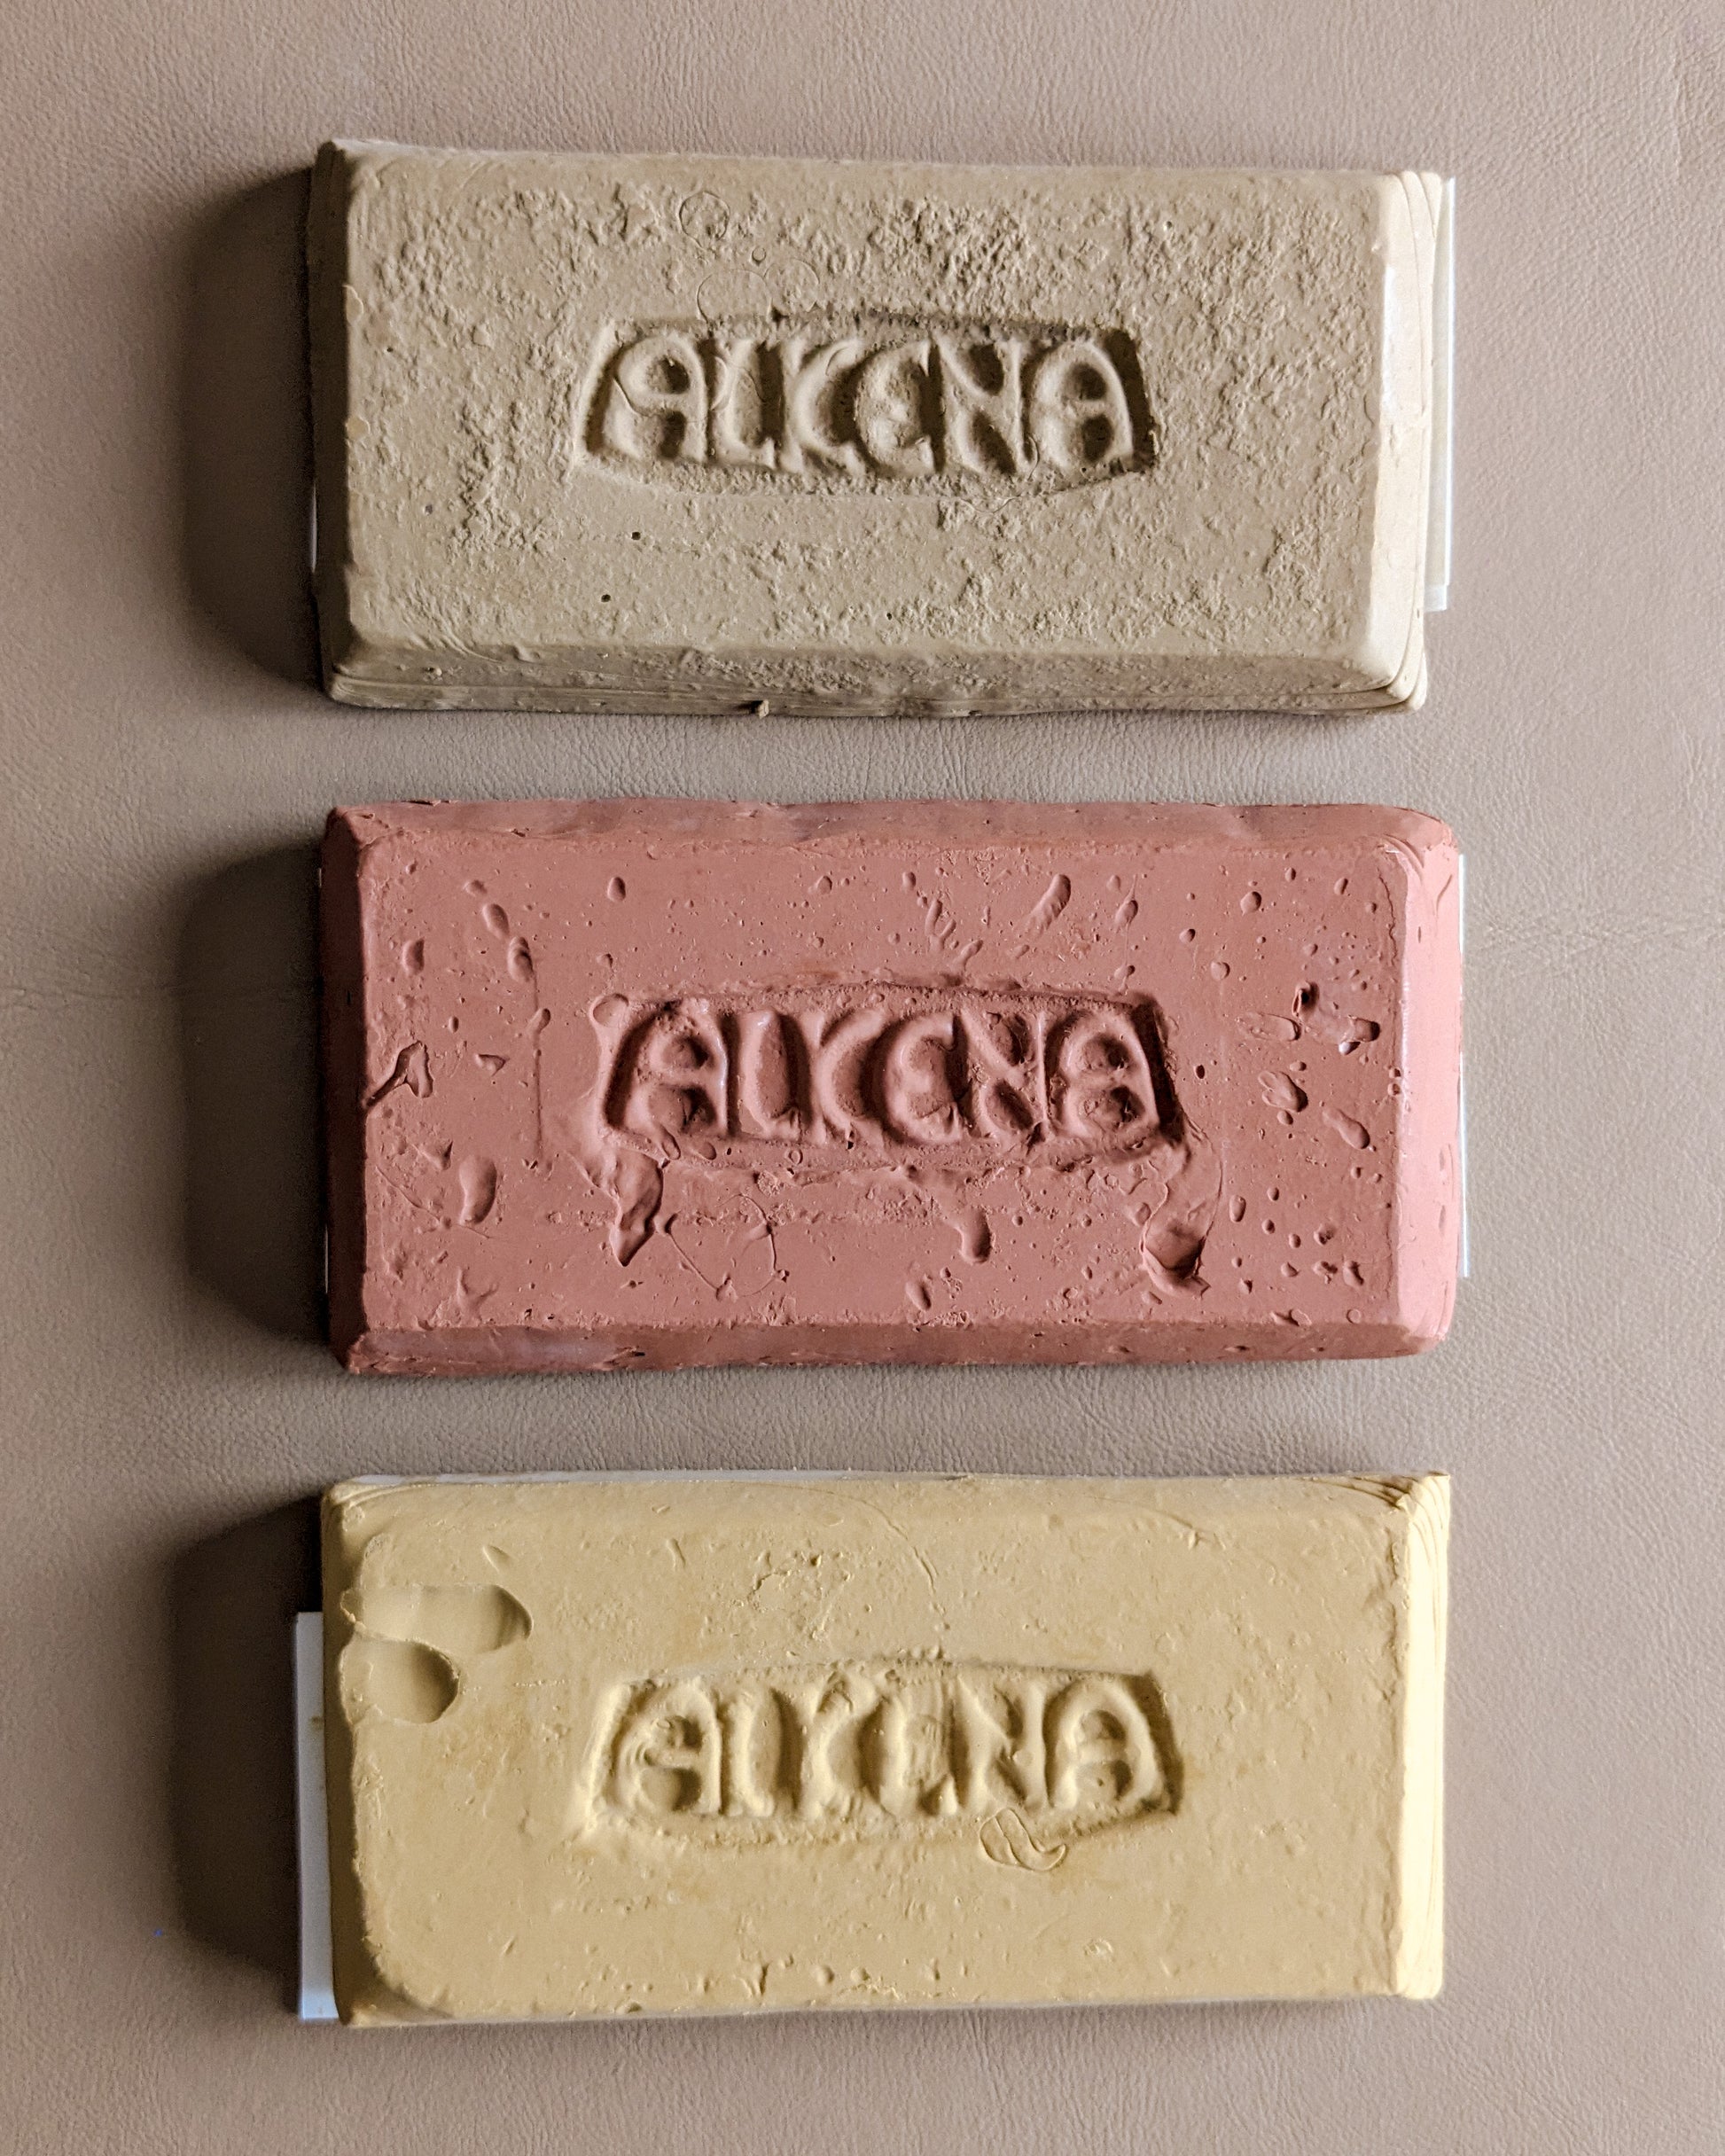 Alkena Modelling Clay w/ Beeswax